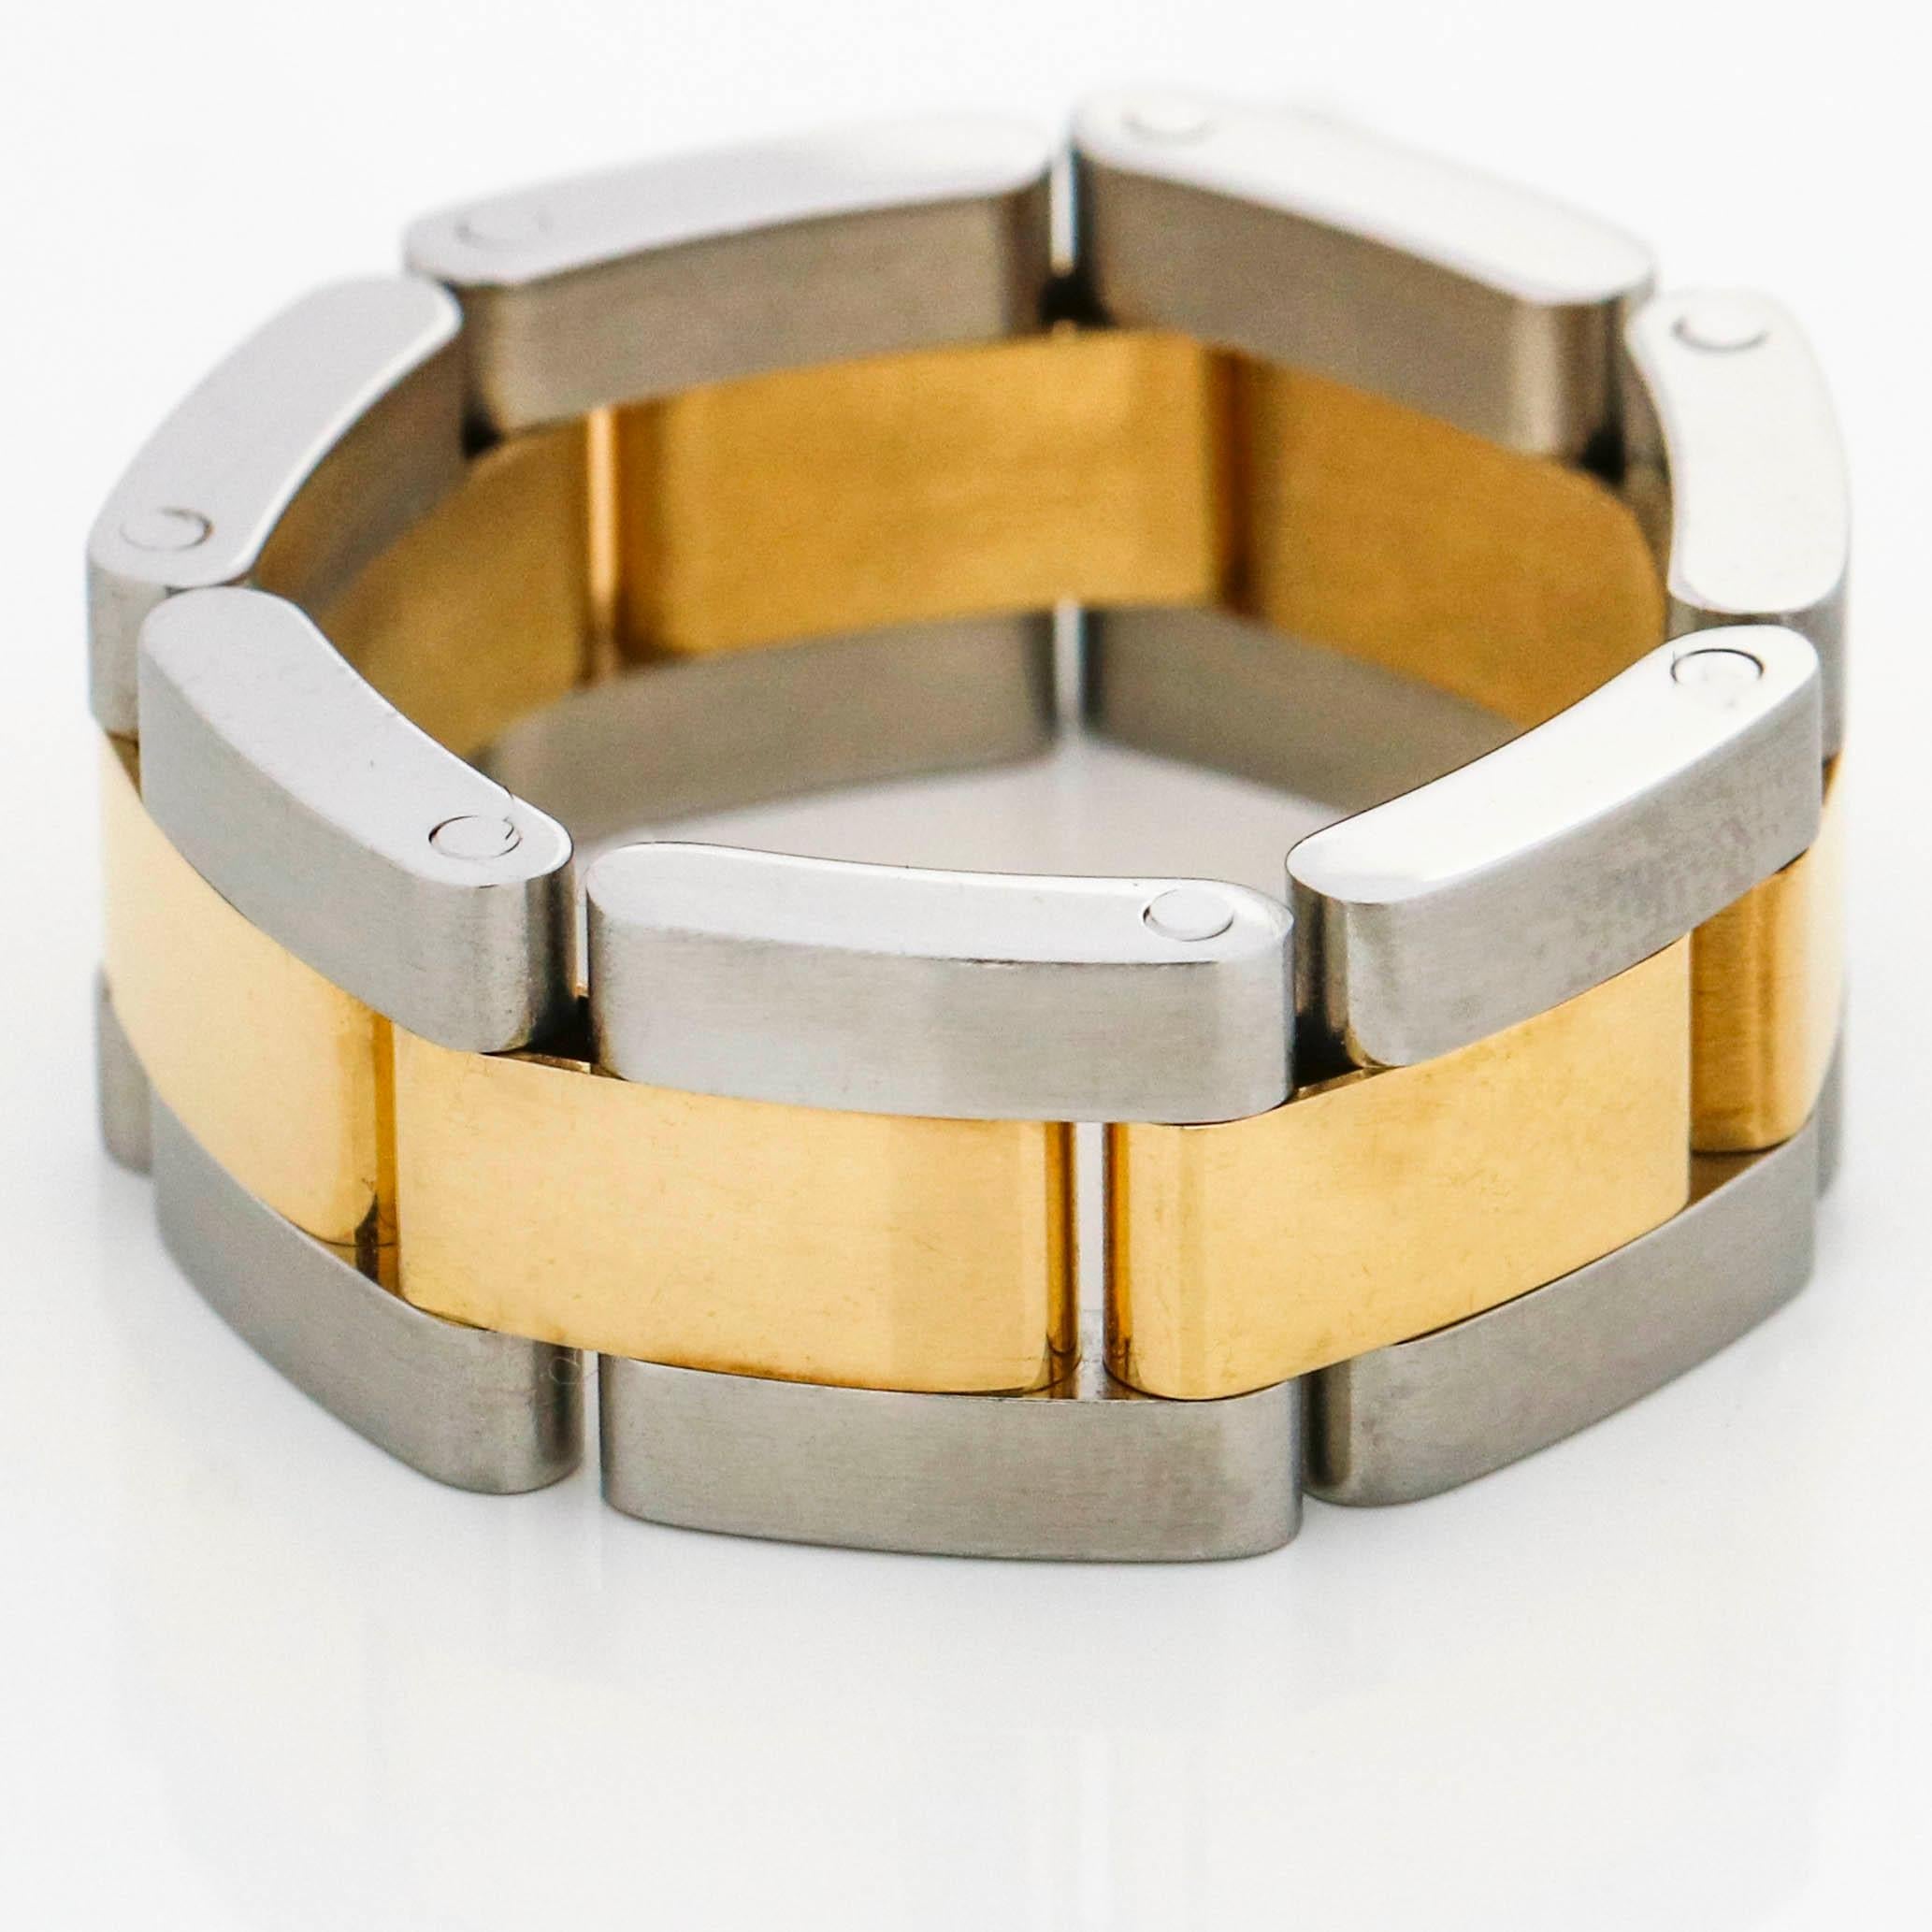 Men's Rolex style oyster bracelet link band in 18-karat yellow gold and stainless steel. The ring has 7 links. 

Size, 10.25
Width, 10mm
Depth, 2.5mm 
Weight, 12.8 grams 

Previously owned, in excellent condition. Original packaging not included.